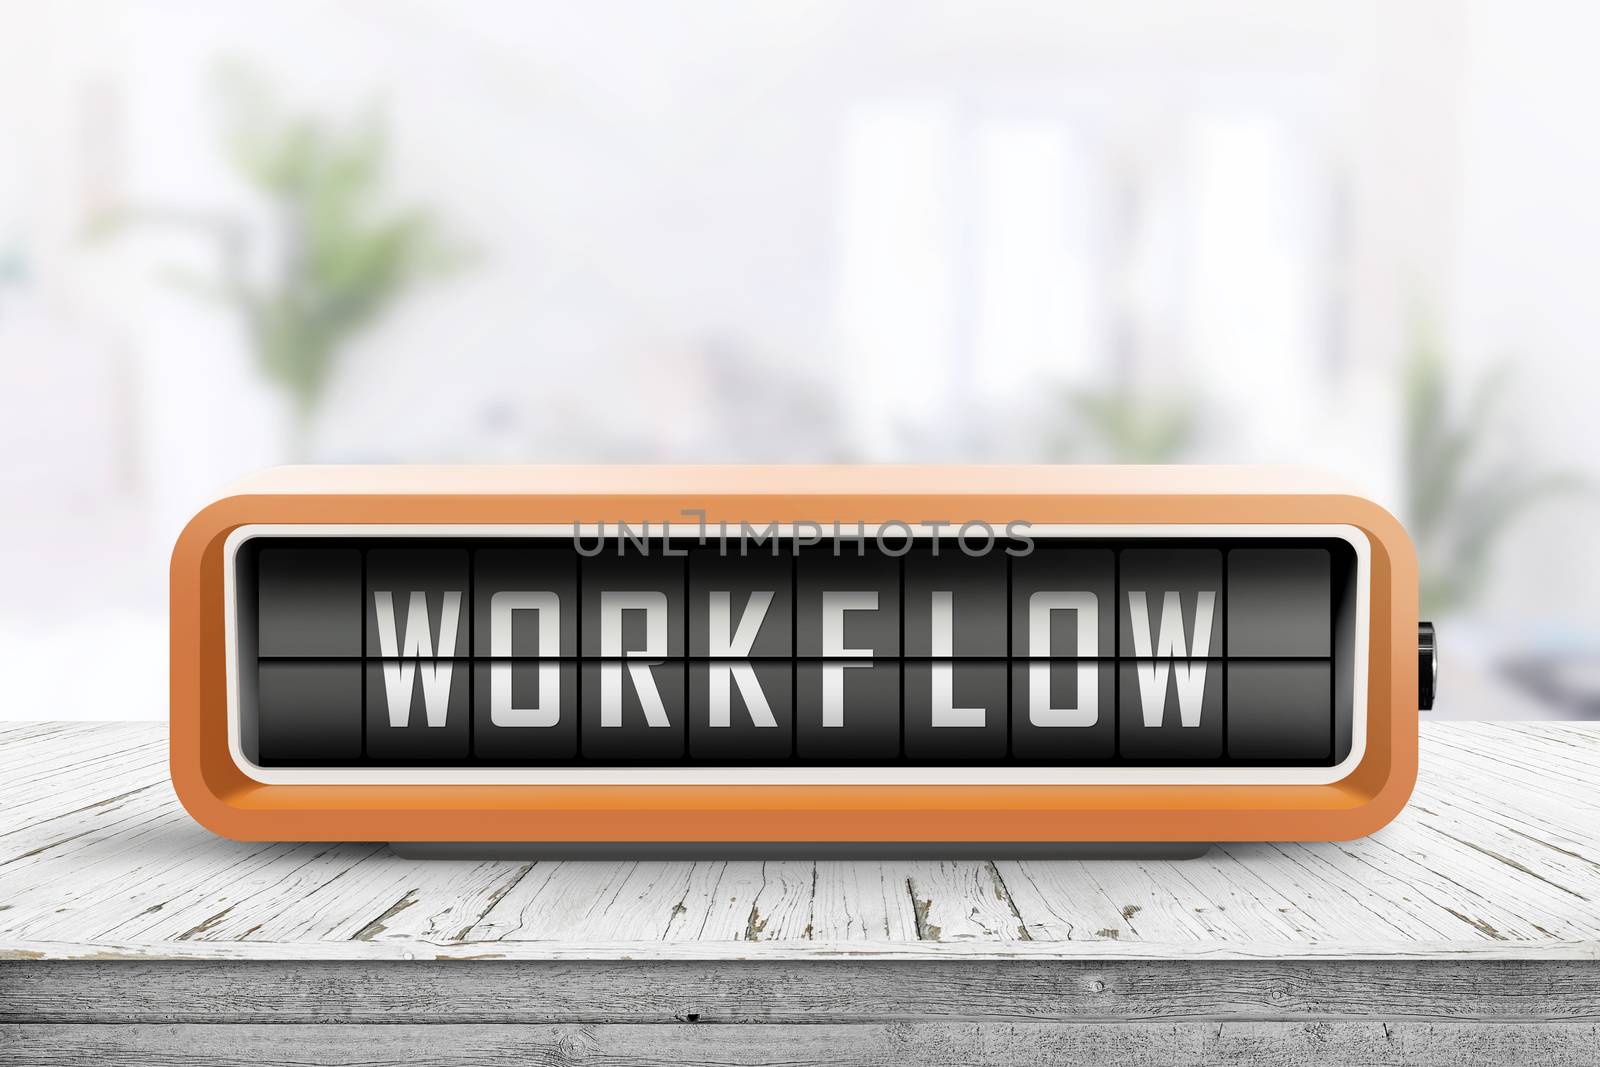 Workflow alarm message on a wooden desk by Sportactive